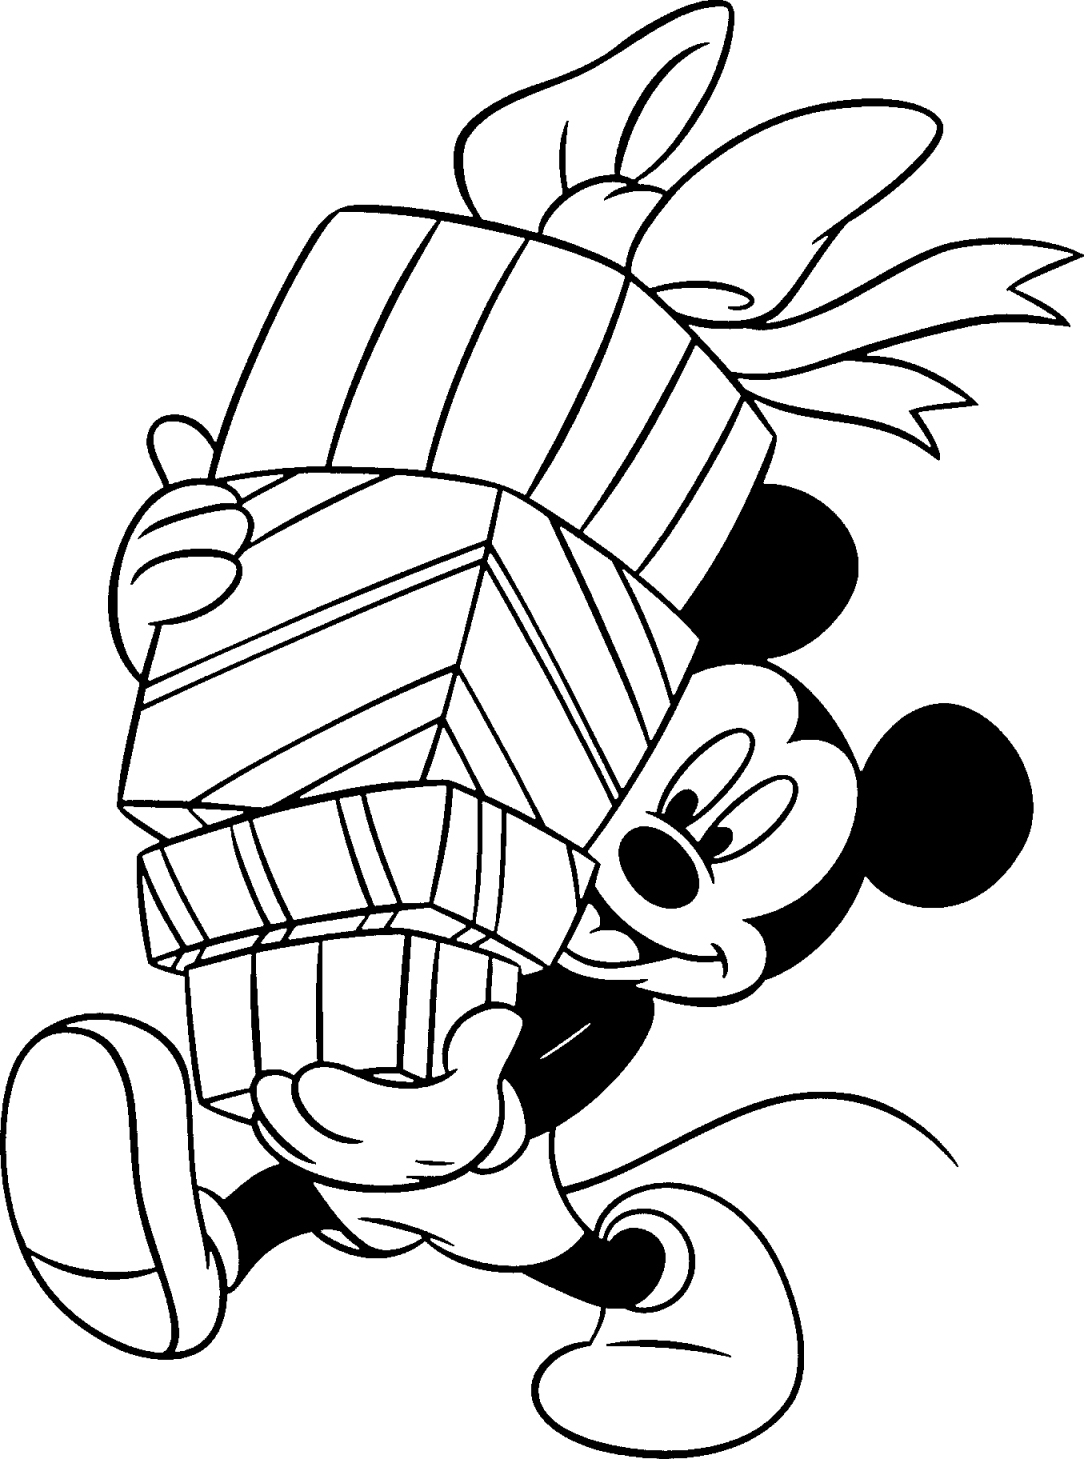  DISNEY Christmas Coloring Pages | Christmas Coloring Pages for kids | Christmas Coloring Pages FREE |8